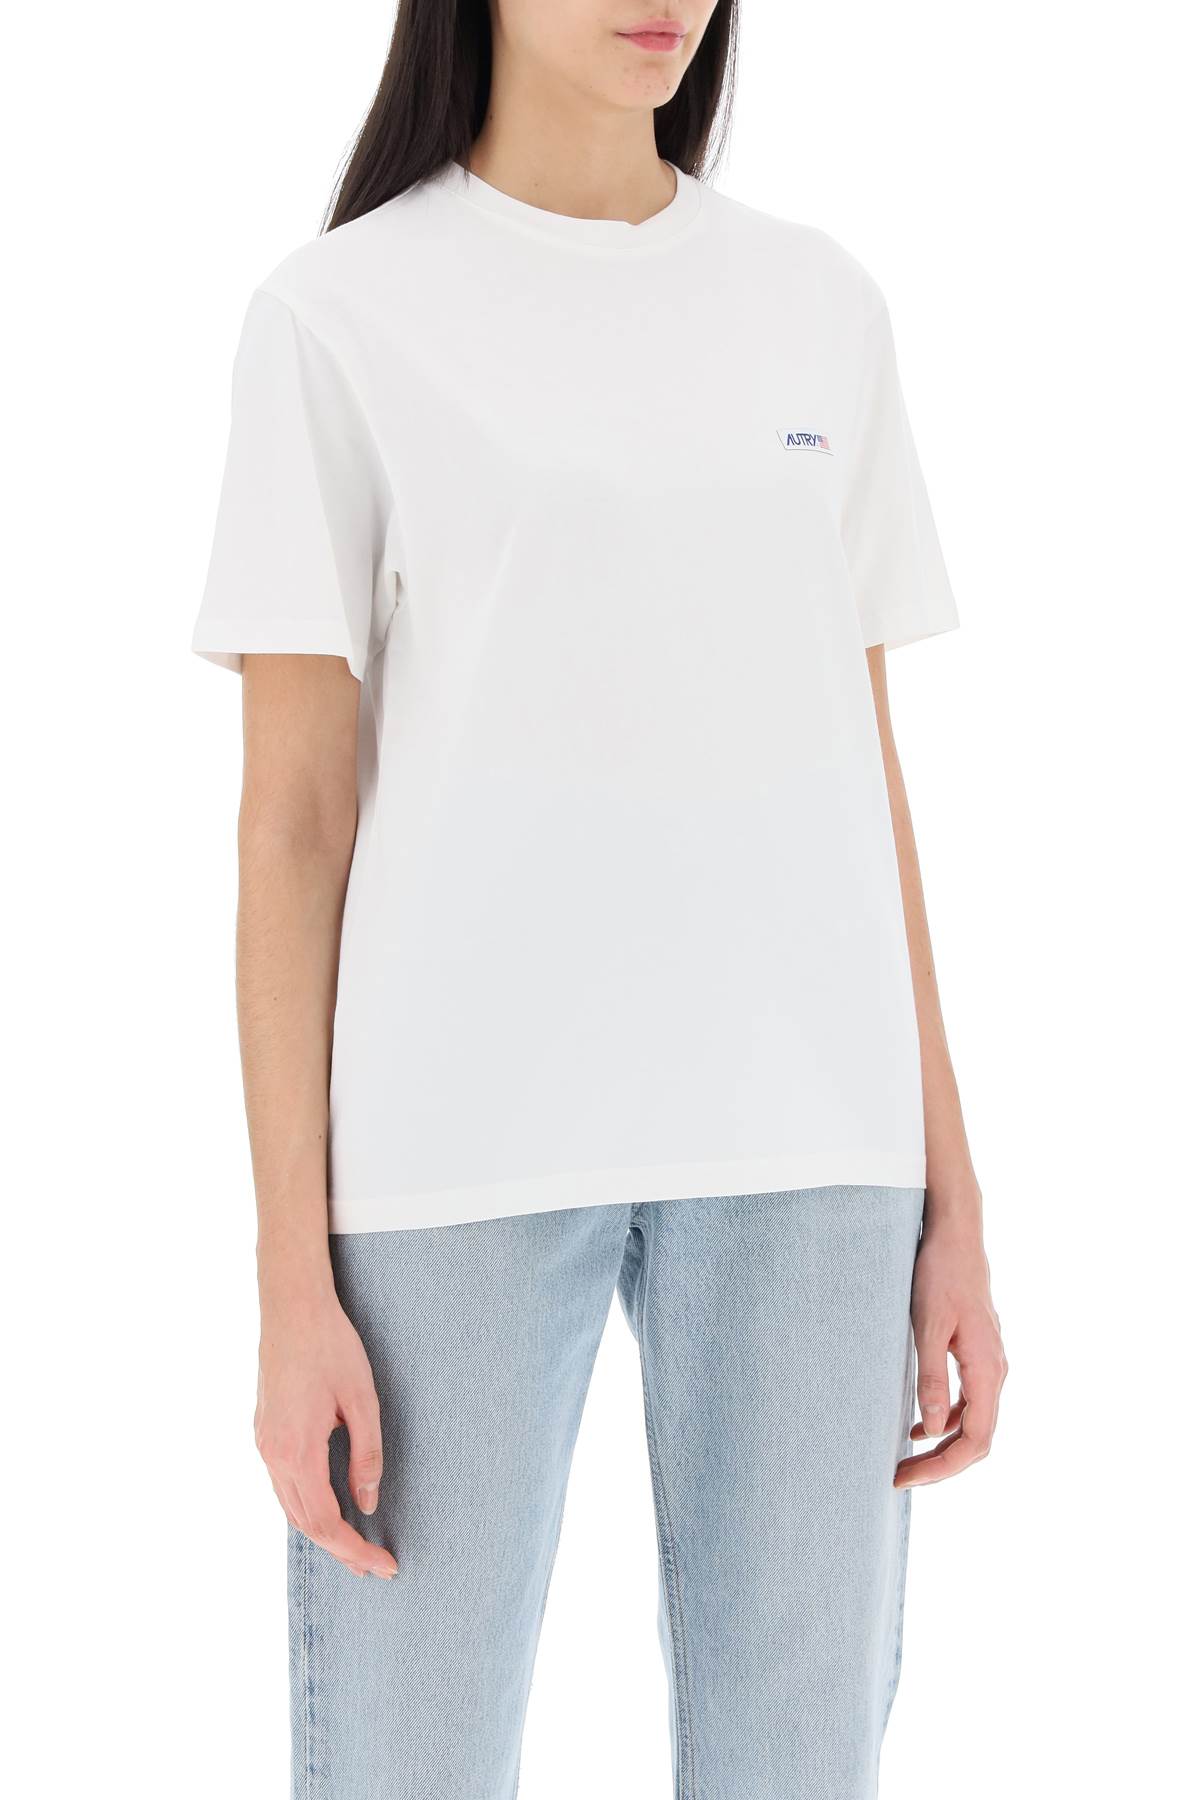 Shop Autry Logo Patch Regular T-shirt In Apparel White